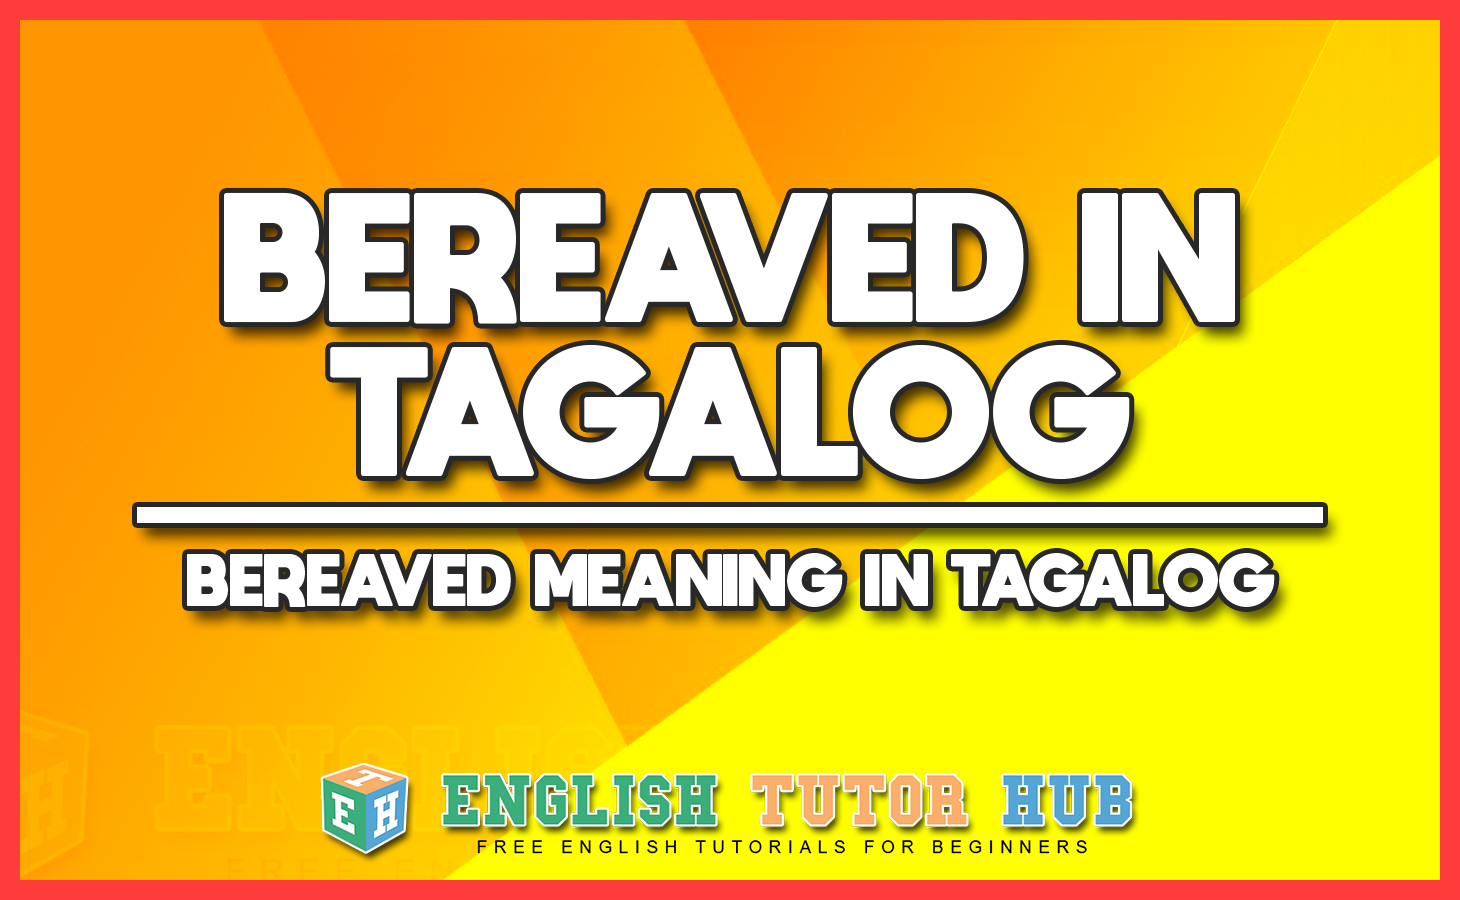 BEREAVED IN TAGALOG - BEREAVED MEANING IN TAGALOG